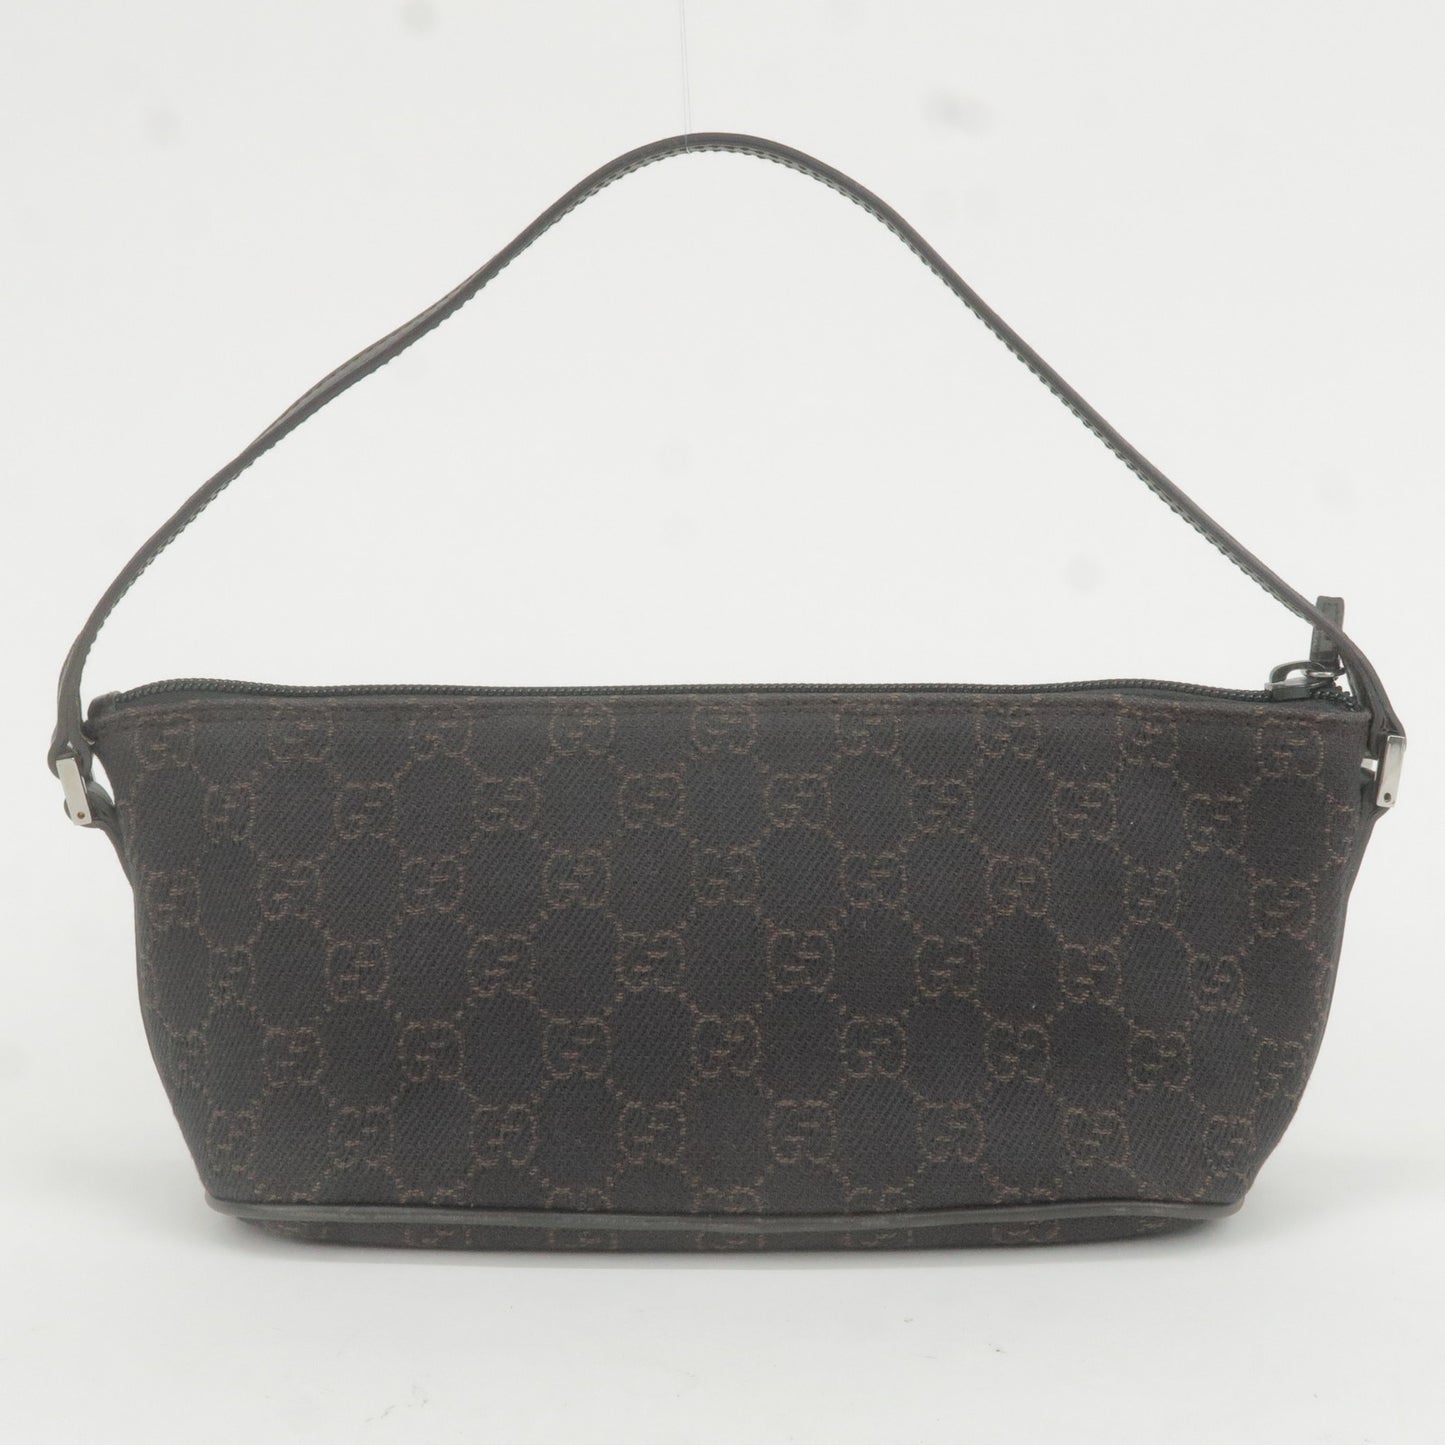 GUCCI GG Canvas Leather Boat Bag Hand Bag Dark Brown 07198